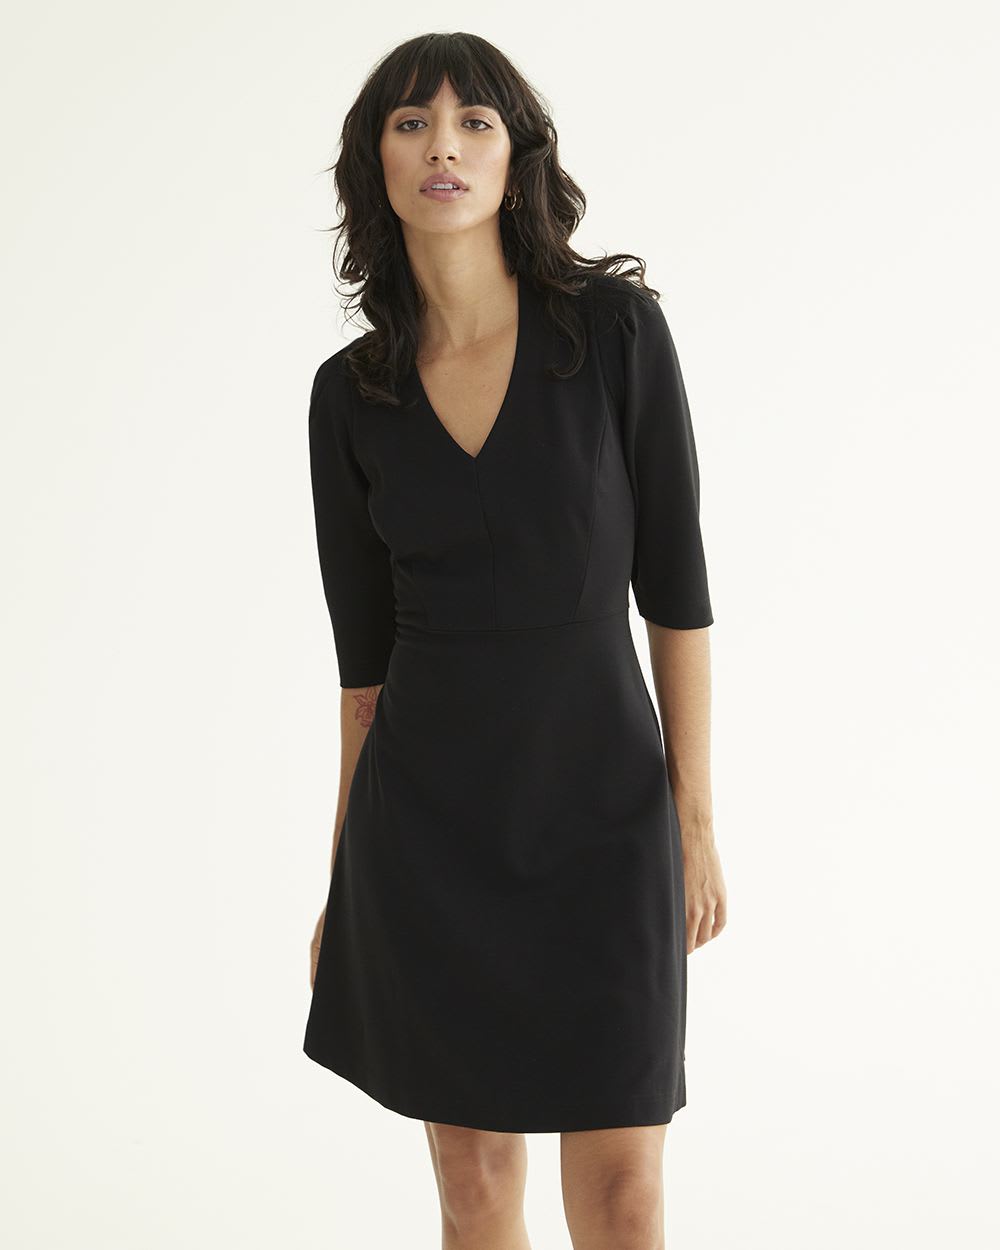 Ponte de Roma Dress with Puffy 3/4 Sleeves